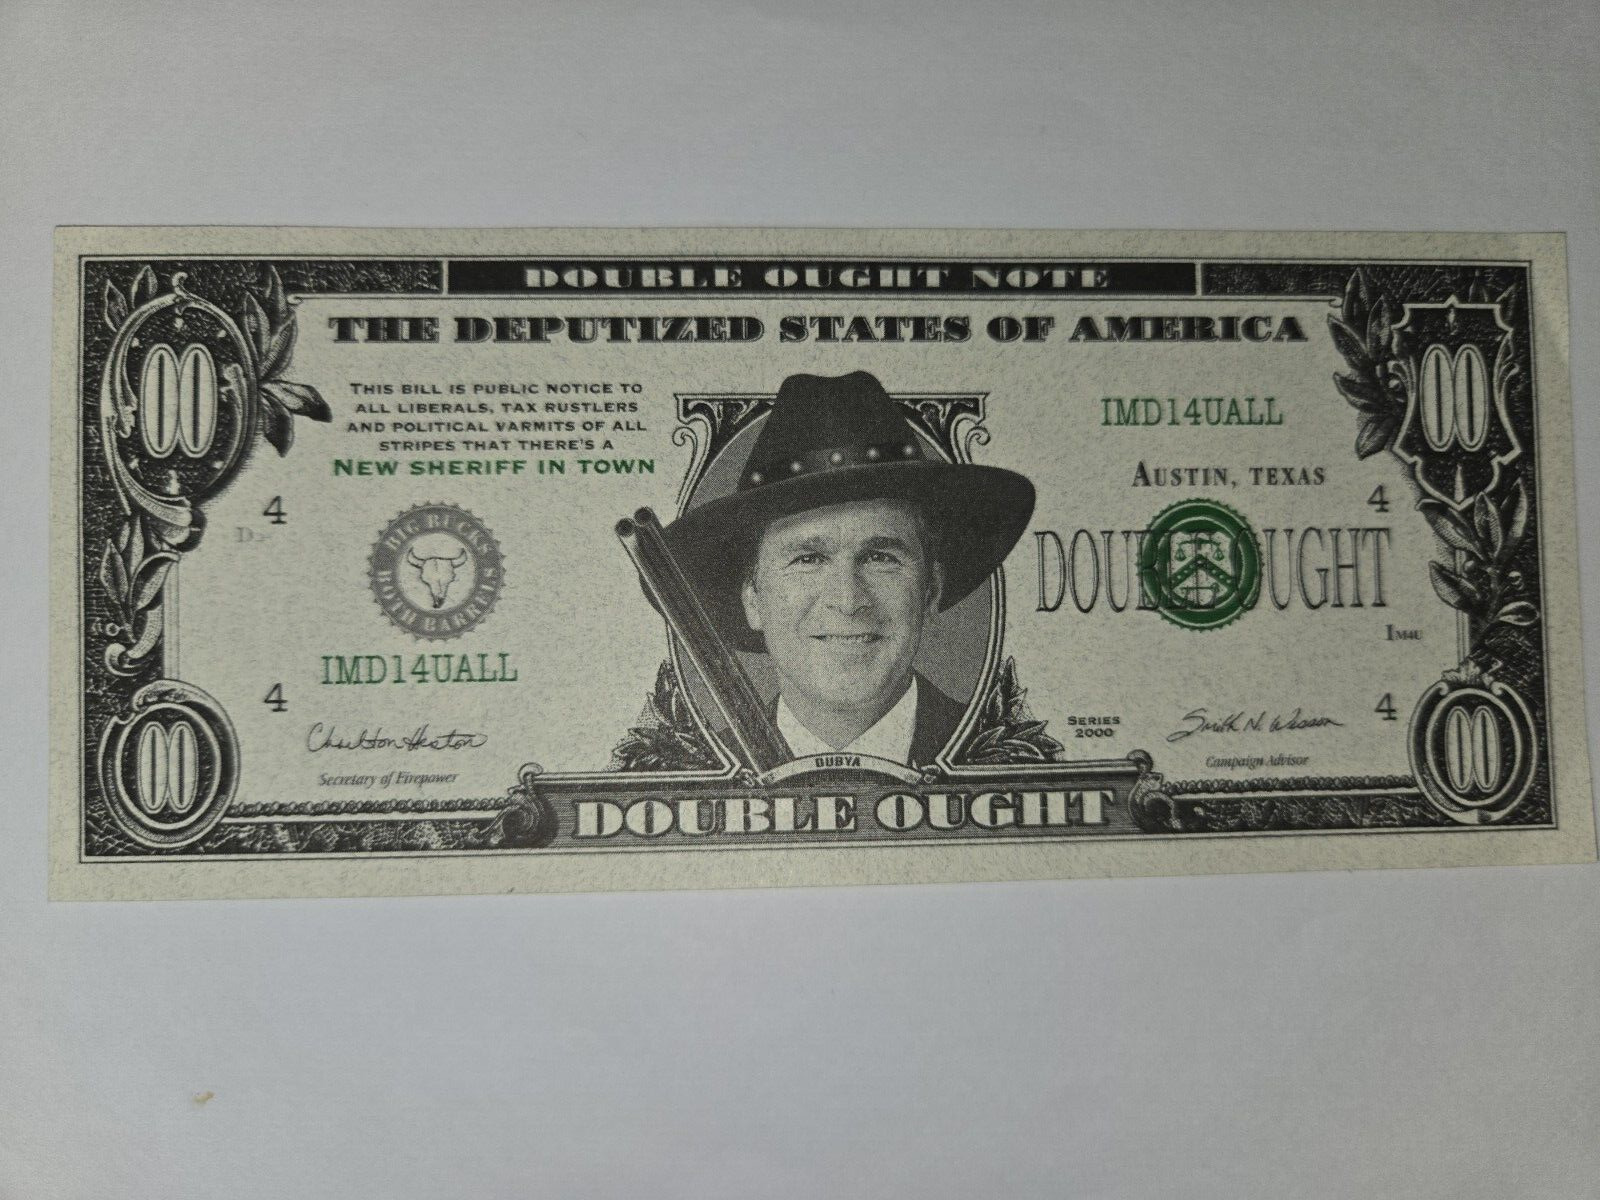 GEORGE W. BUSH  NOTE Double Ought Dollar Bill The deputized states Of America